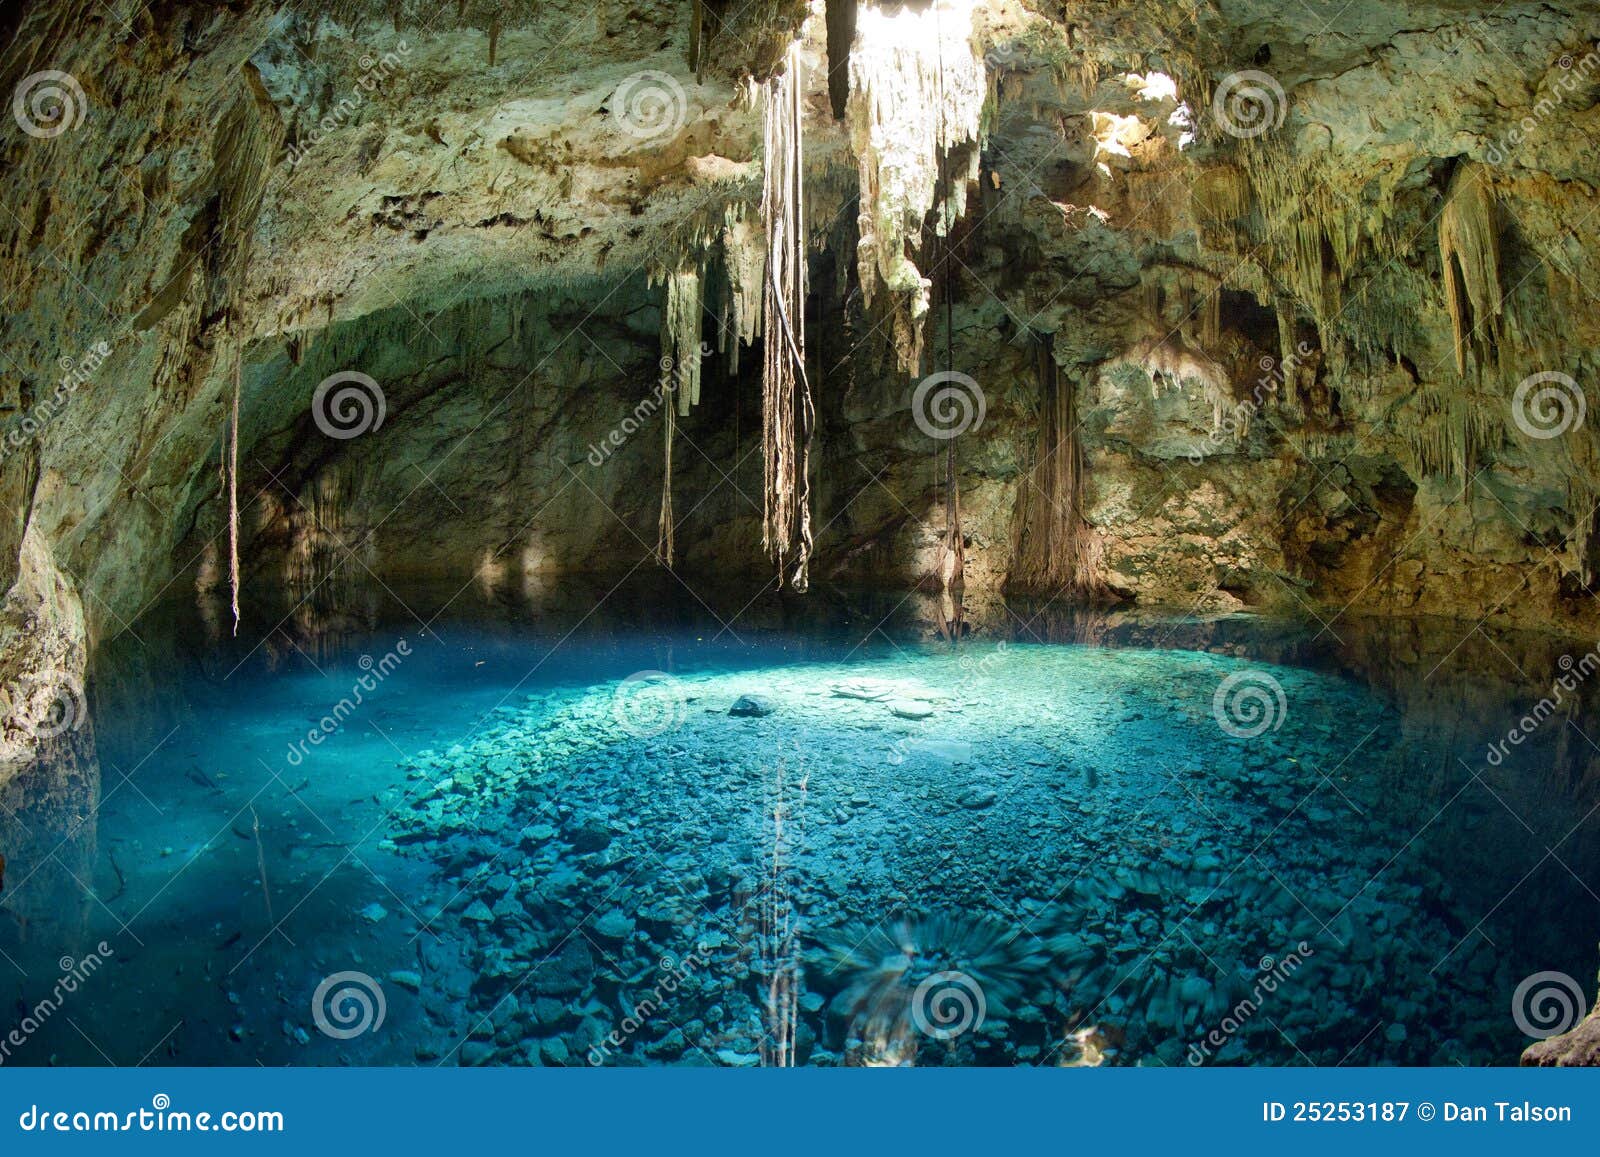 Mexican Cenote Sinkhole Stock Image Image Of Mayan 25253187